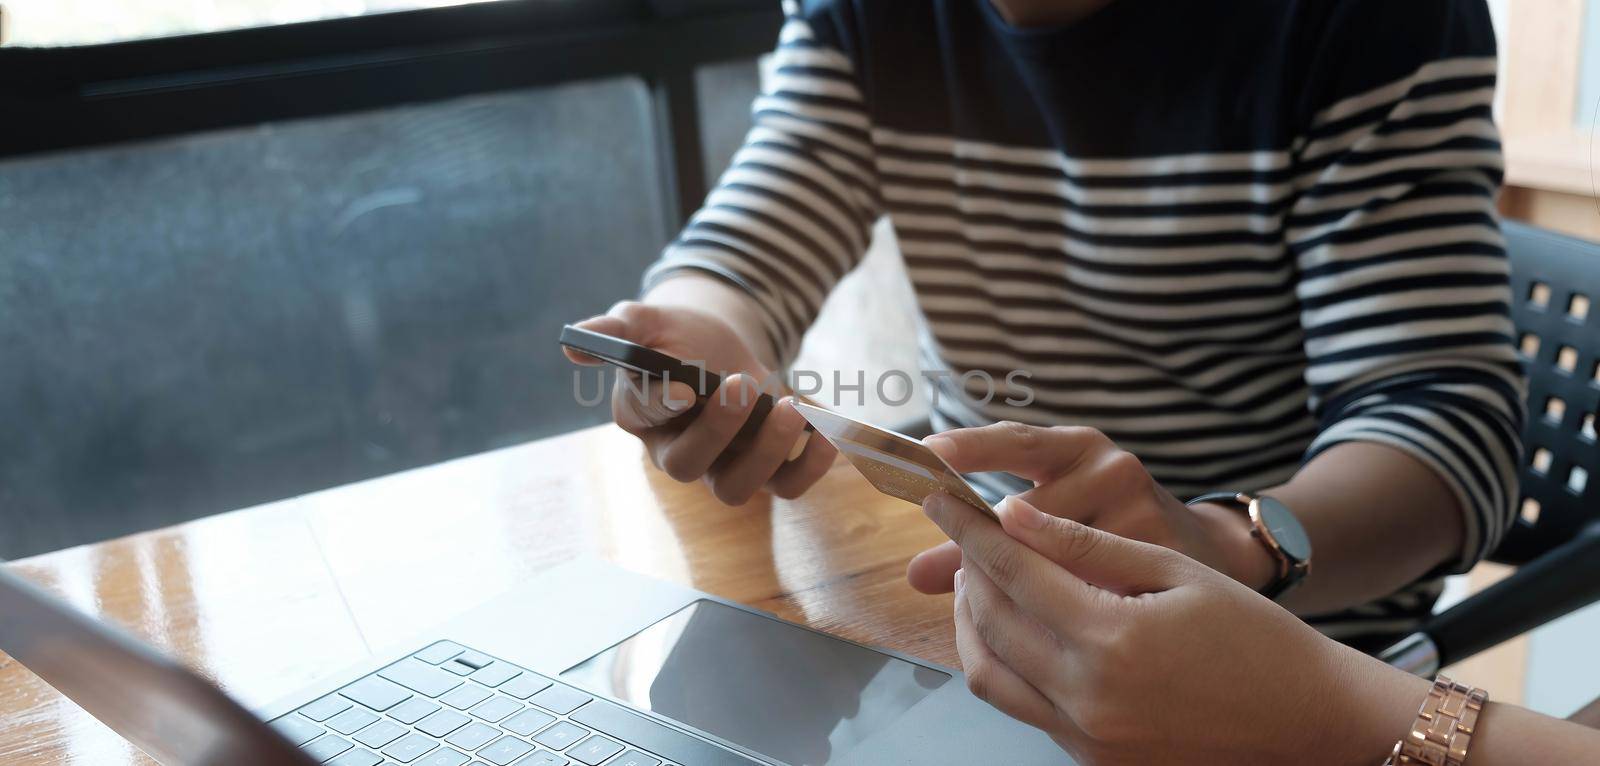 Two Asian women hold a credit card and use a smartphone to search for shopping information..